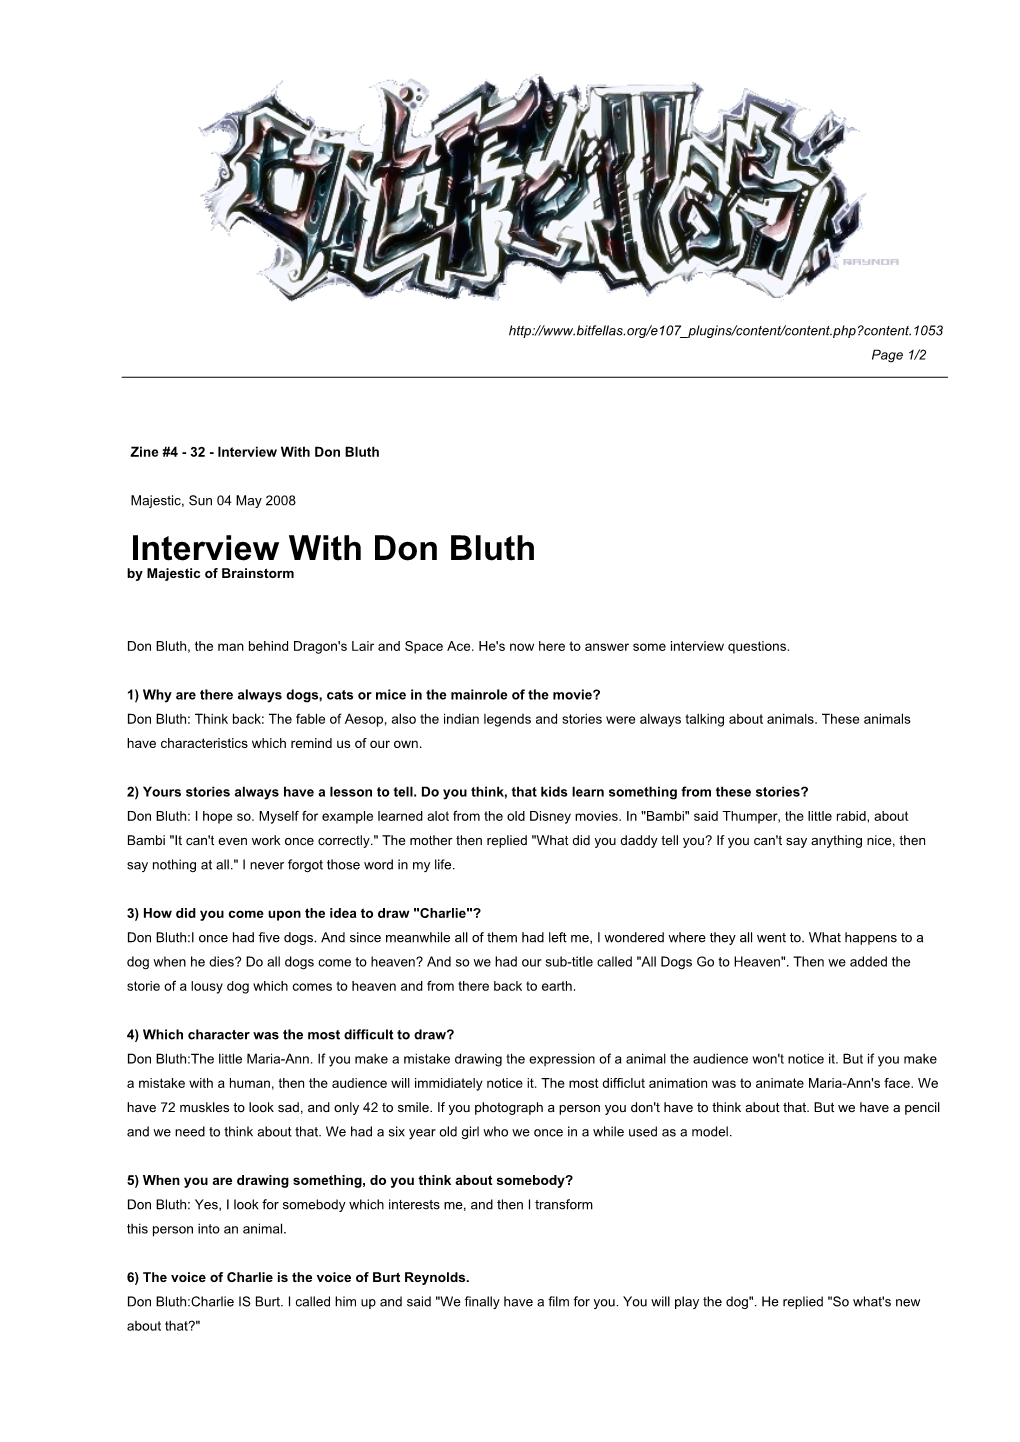 Interview with Don Bluth � �Majestic, Sun 04 May 2008 � �Interview with Don Bluth by Majestic of Brainstorm